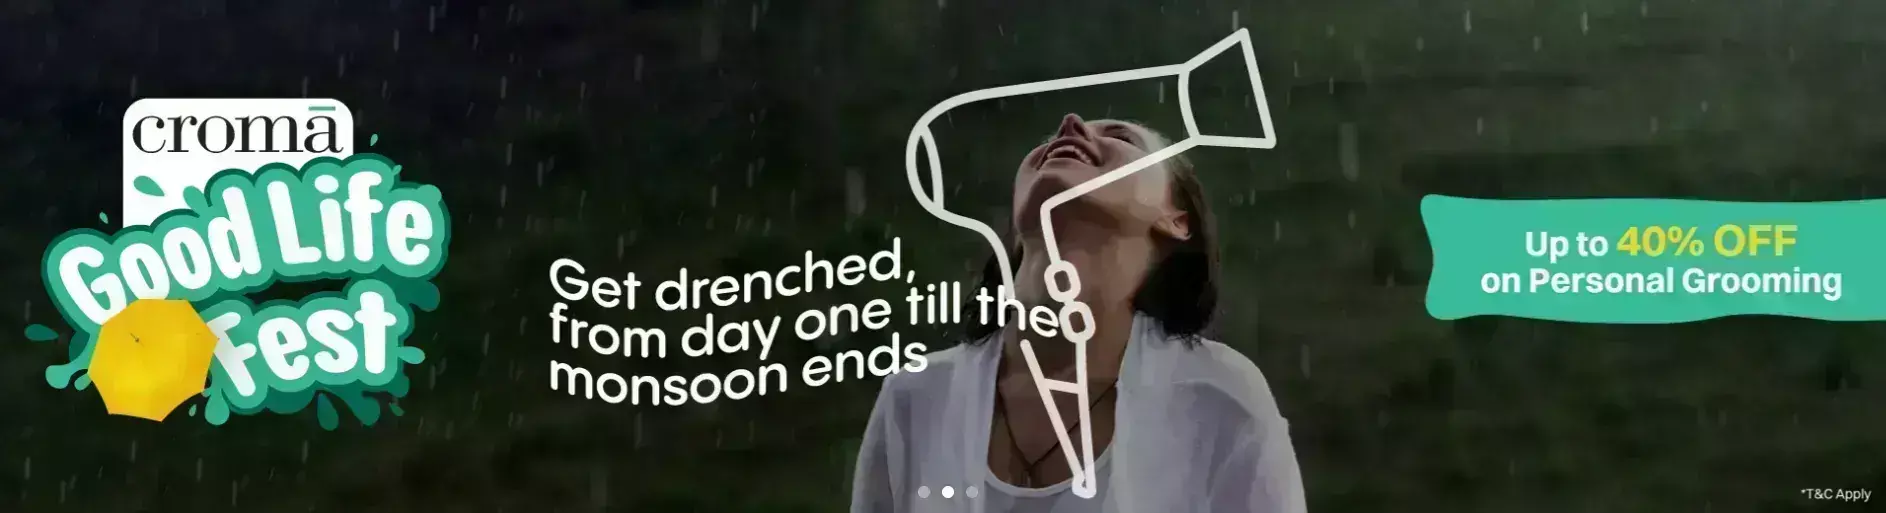 Croma launches its monsoon campaign-Good Life Fest